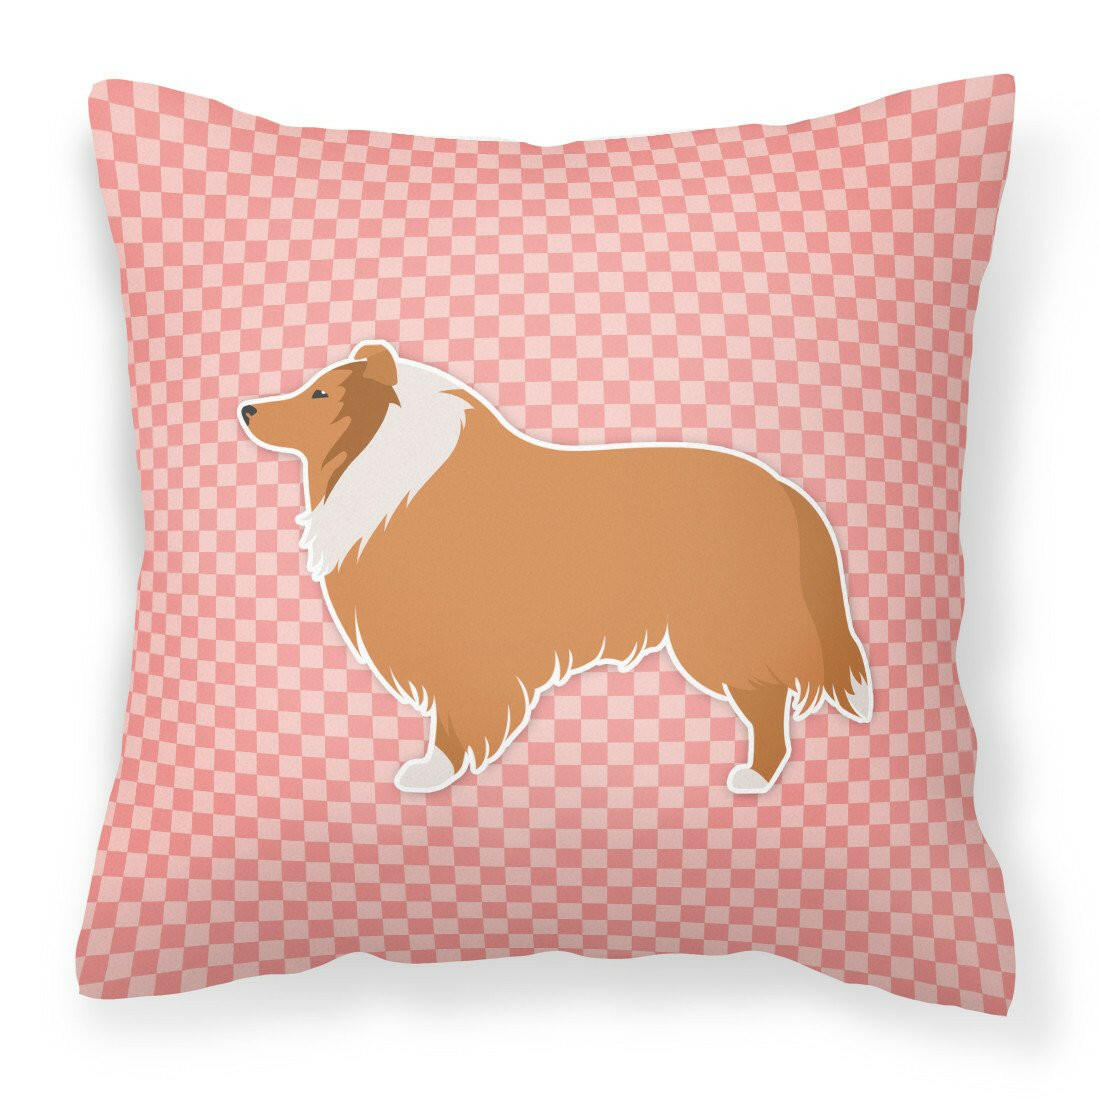 Collie Checkerboard Pink Fabric Decorative Pillow BB3616PW1818 by Caroline's Treasures